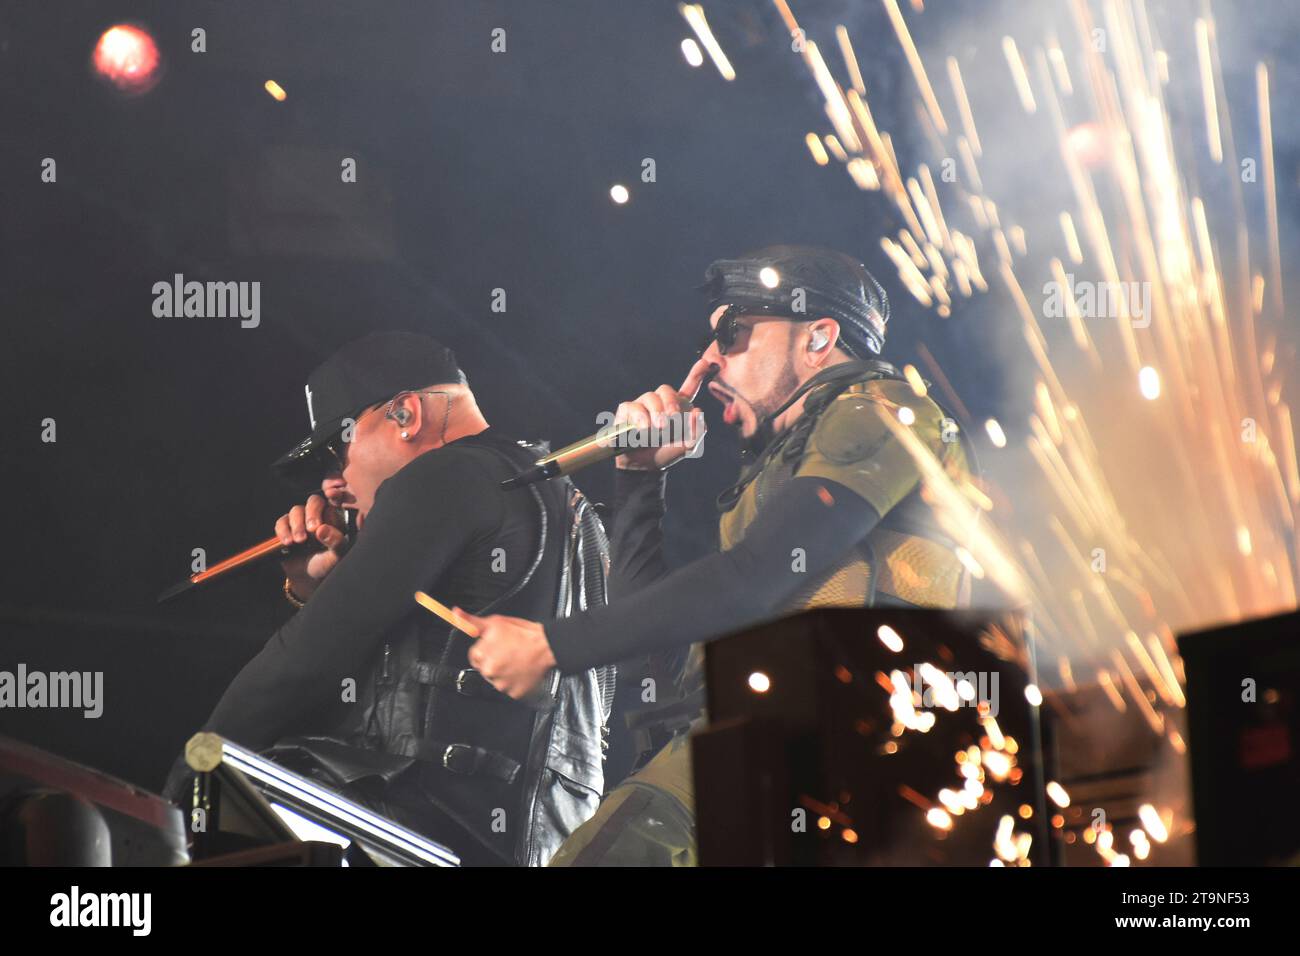 Mexico City, Mexico. 25th Nov, 2023. Juan Luis Morera, known as Wisin, and Llandel Veguilla, known as Yandel, members of the Puerto Rican Reggaeton duo Wisin & Yandel, are performing on stage as part of the 'Coca Cola Flow Fest 2023' Reggaeton music festival at Autodromo Hermanos Rodriguez in Mexico City, Mexico, on November 25, 2023. (Photo by Essene Hernandez/Eyepix Group) Credit: NurPhoto SRL/Alamy Live News Stock Photo